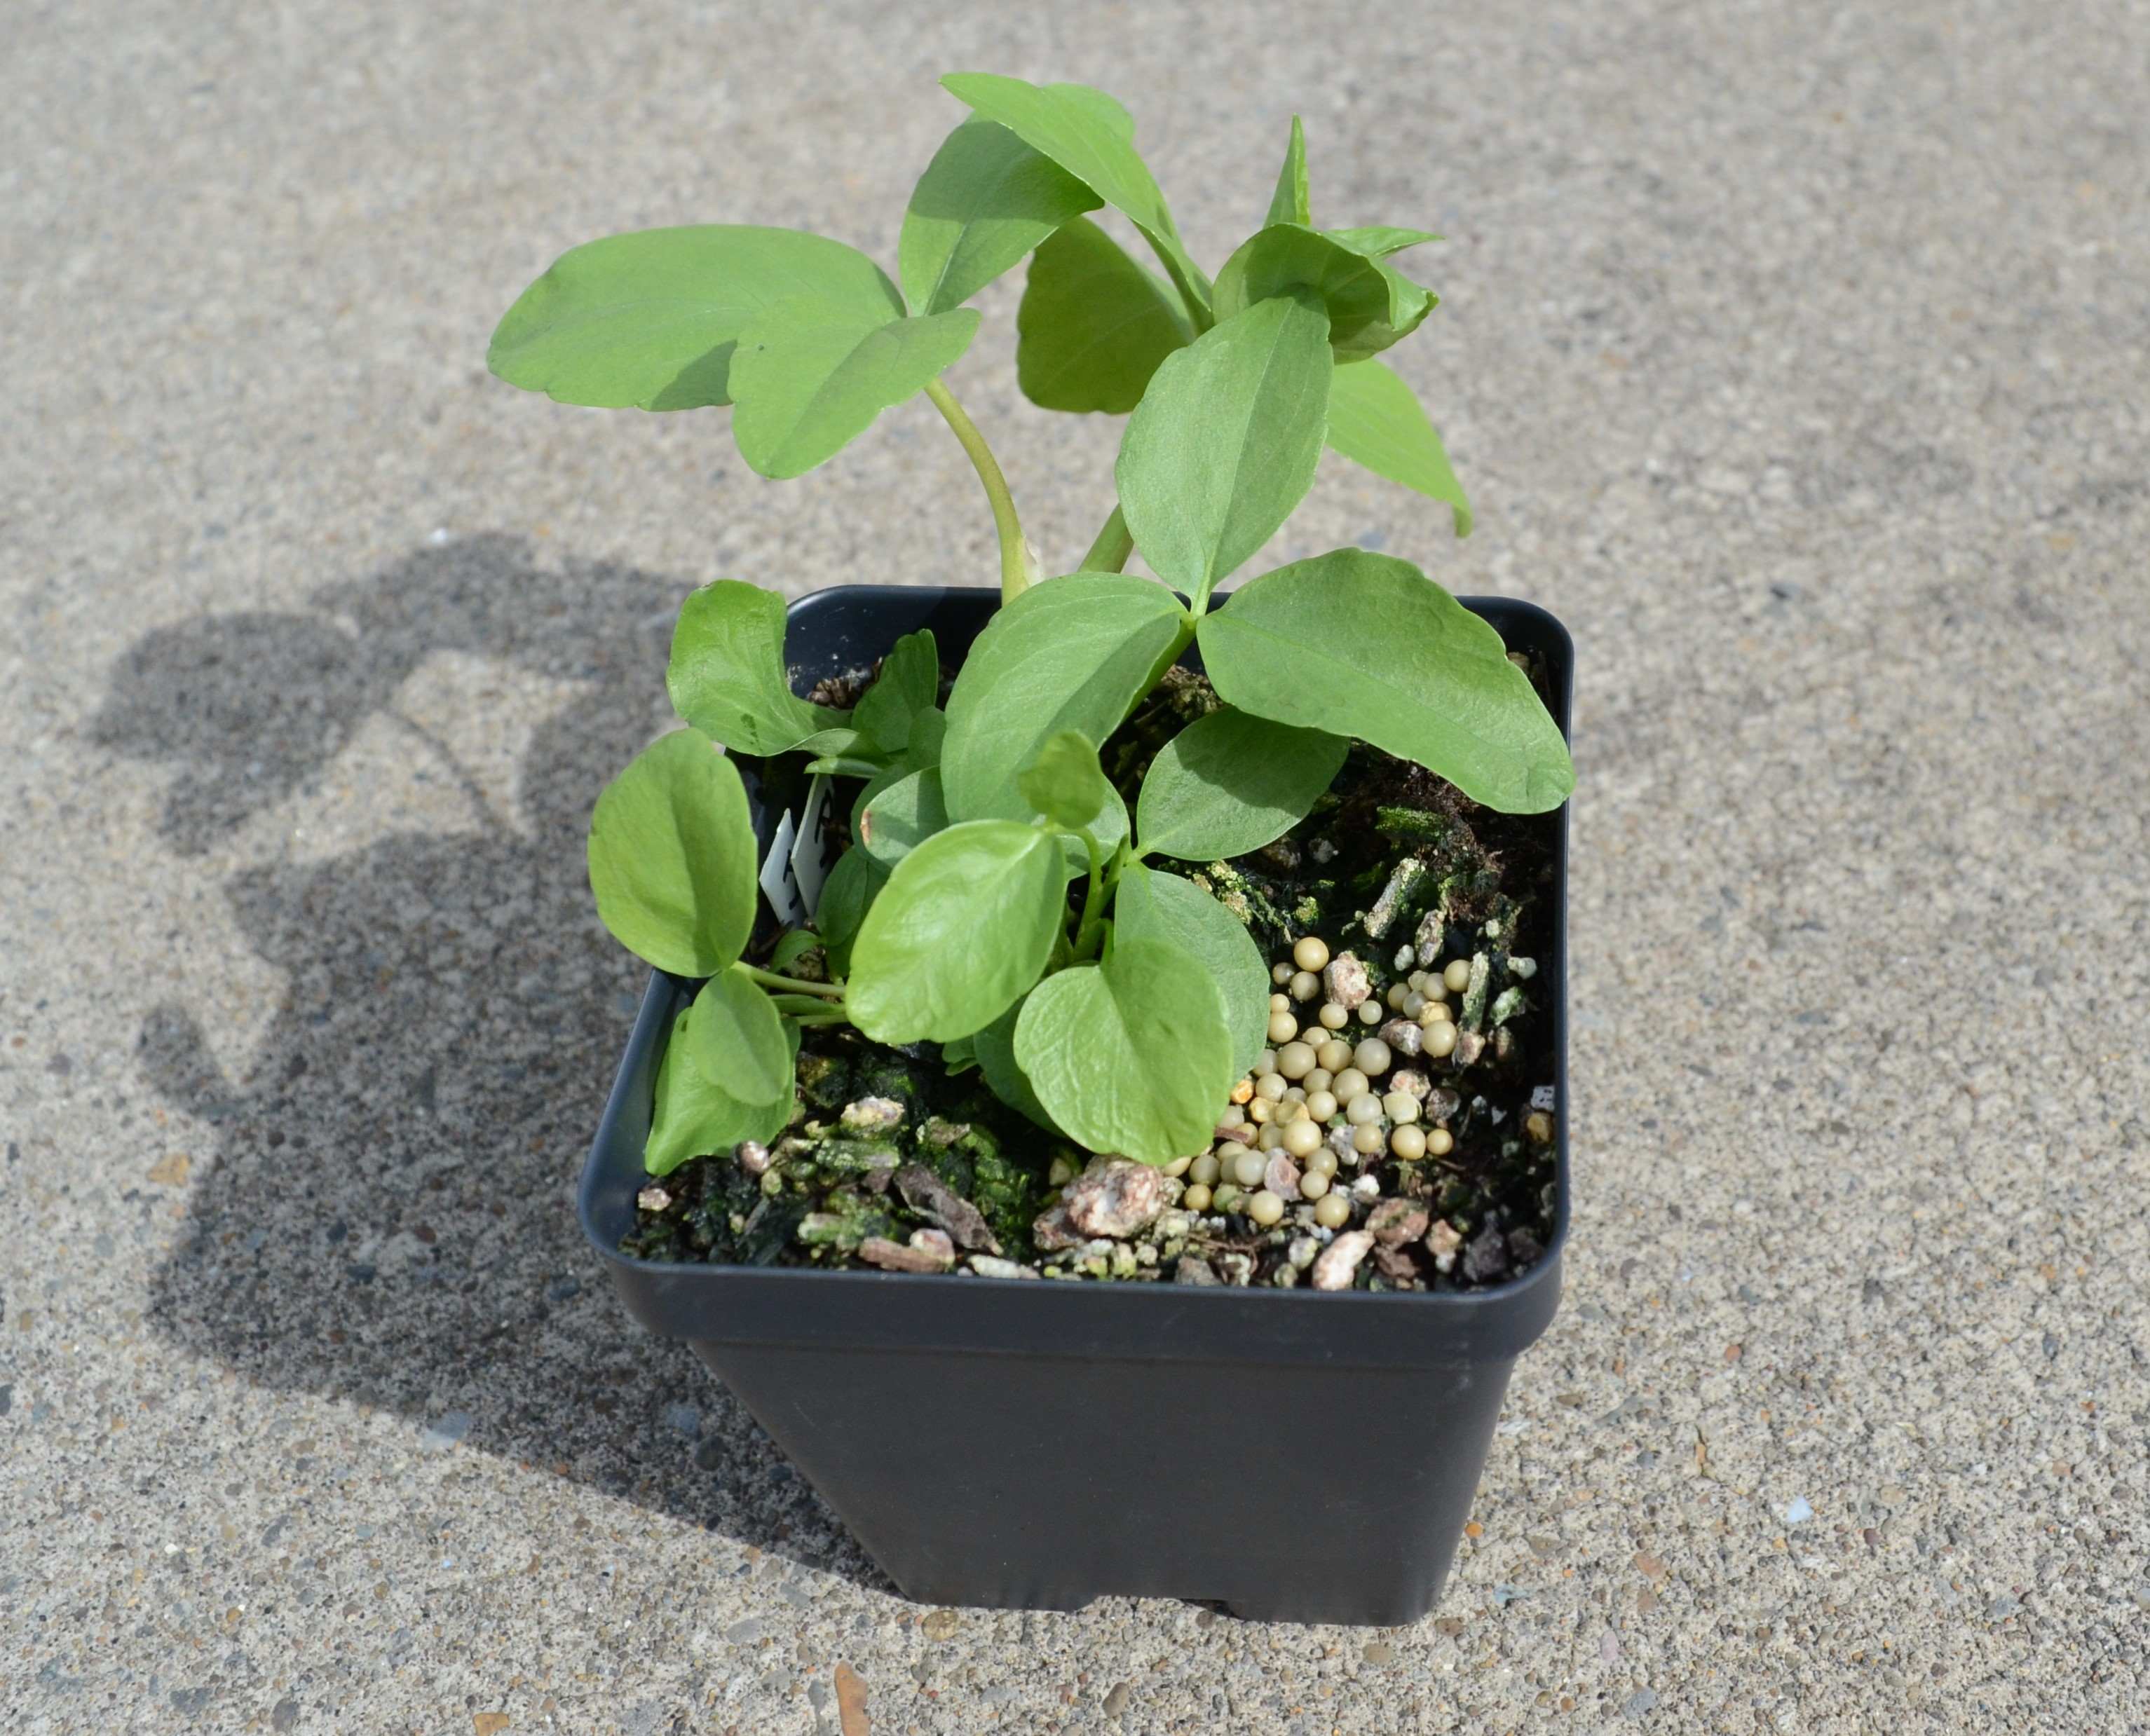 Menyanthes trifoliata growing in a 4-inch container at the Berry Seed Bank research nursery located in Portland, Oregon.